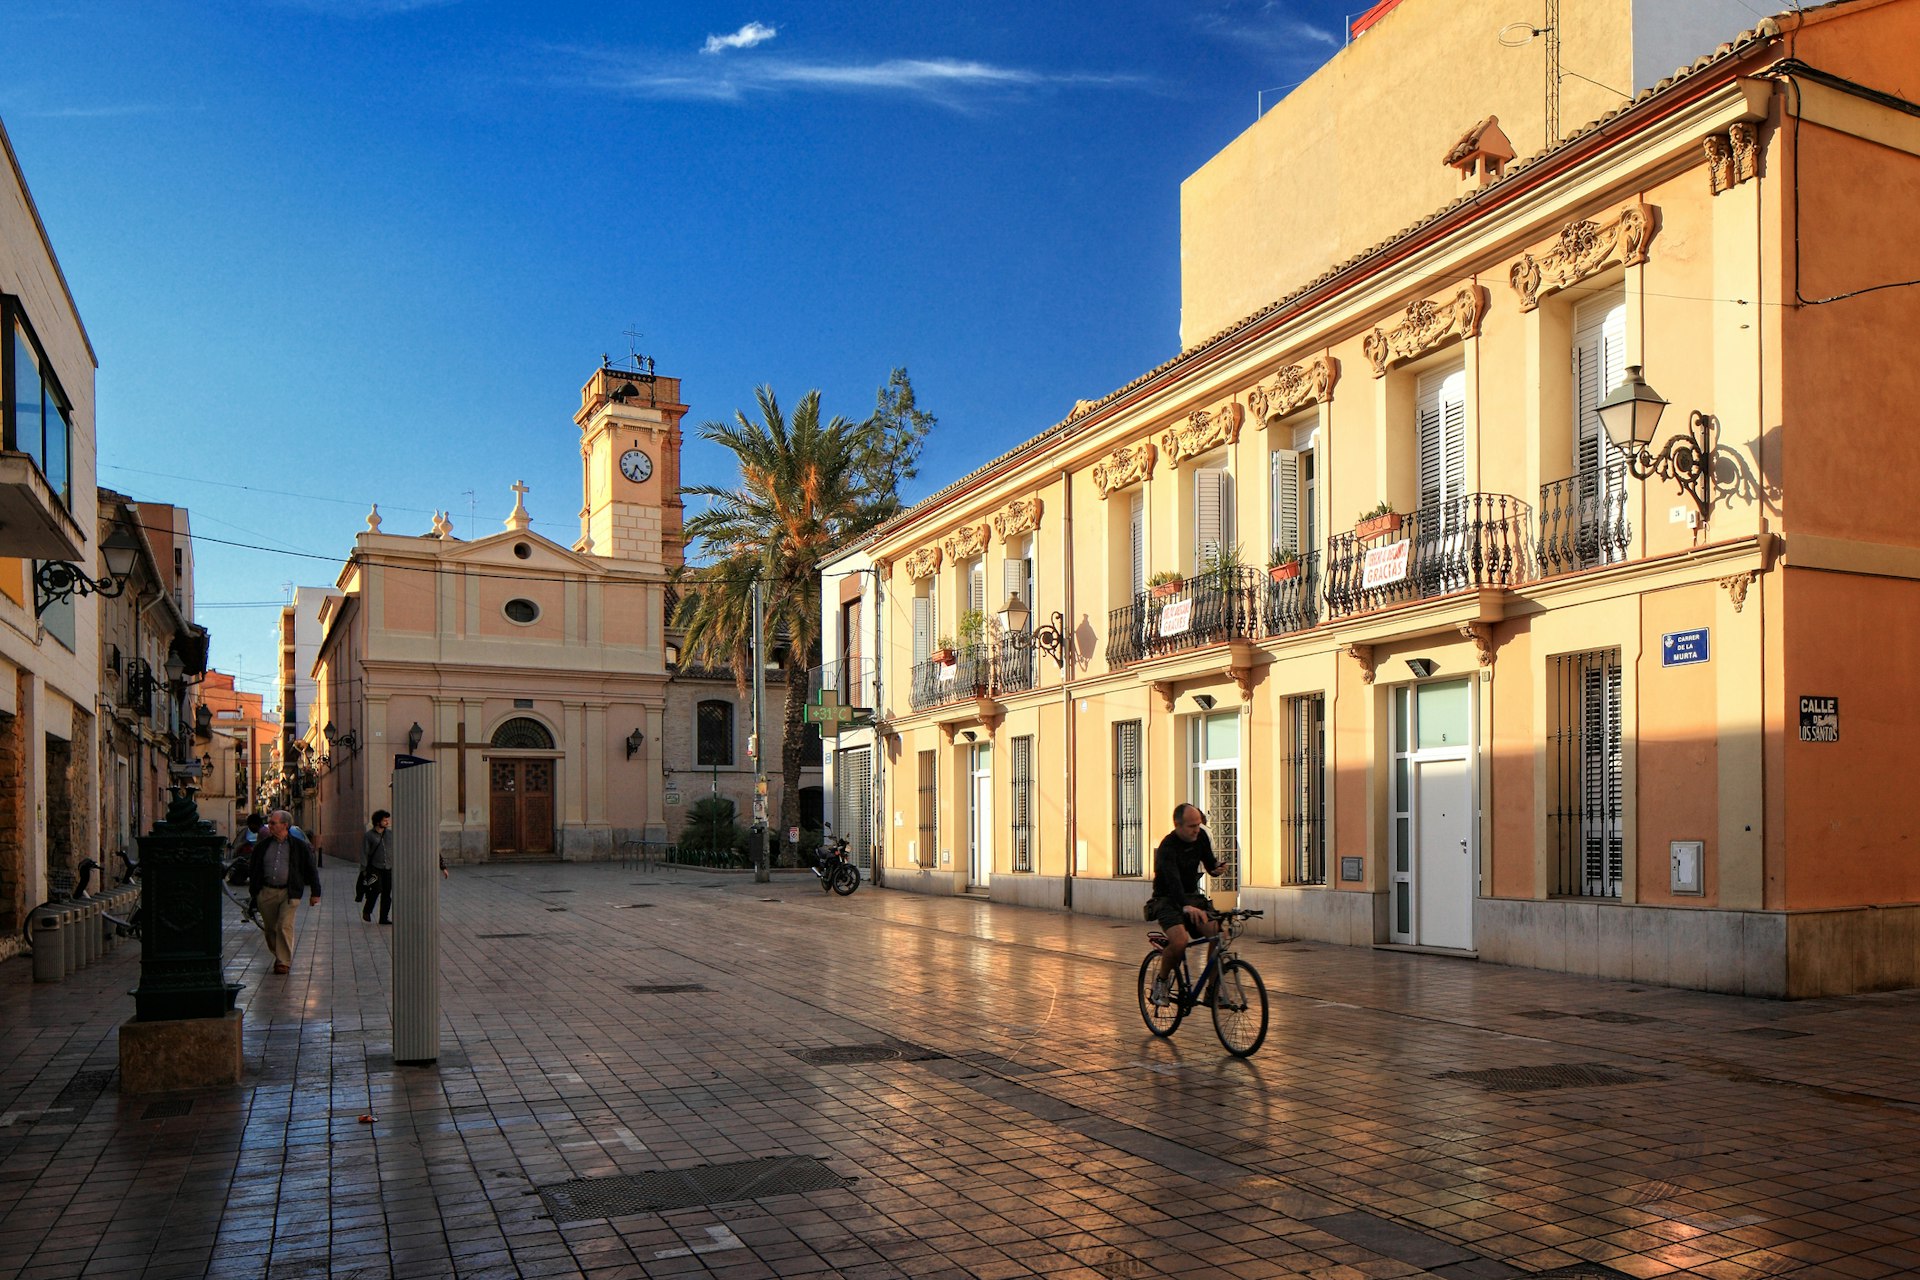 A cyclist whizzes along the shiny tiles of the Benimaclet neighborhood in Valencia, Spain as the sun begins to lift over the buildings on the left to illuminate the lovely balconies on a wonderful peach-coloured building.